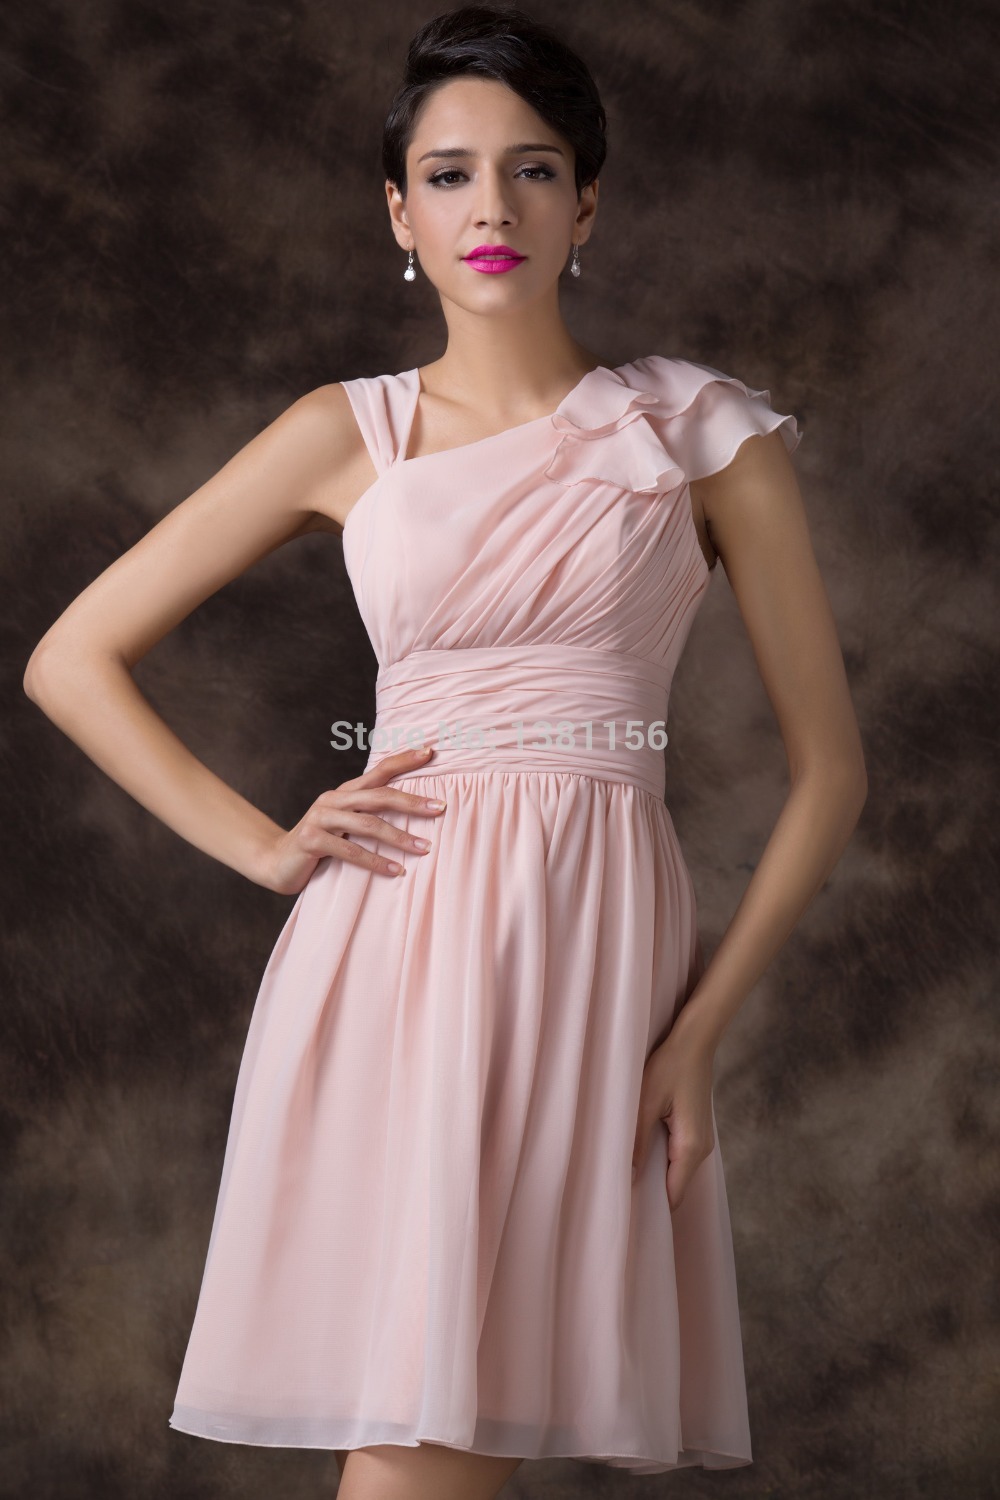 ... -Ball-Cocktail-Prom-Party-Dress-Short-Women-Party-Gowns-CL6221K.jpg